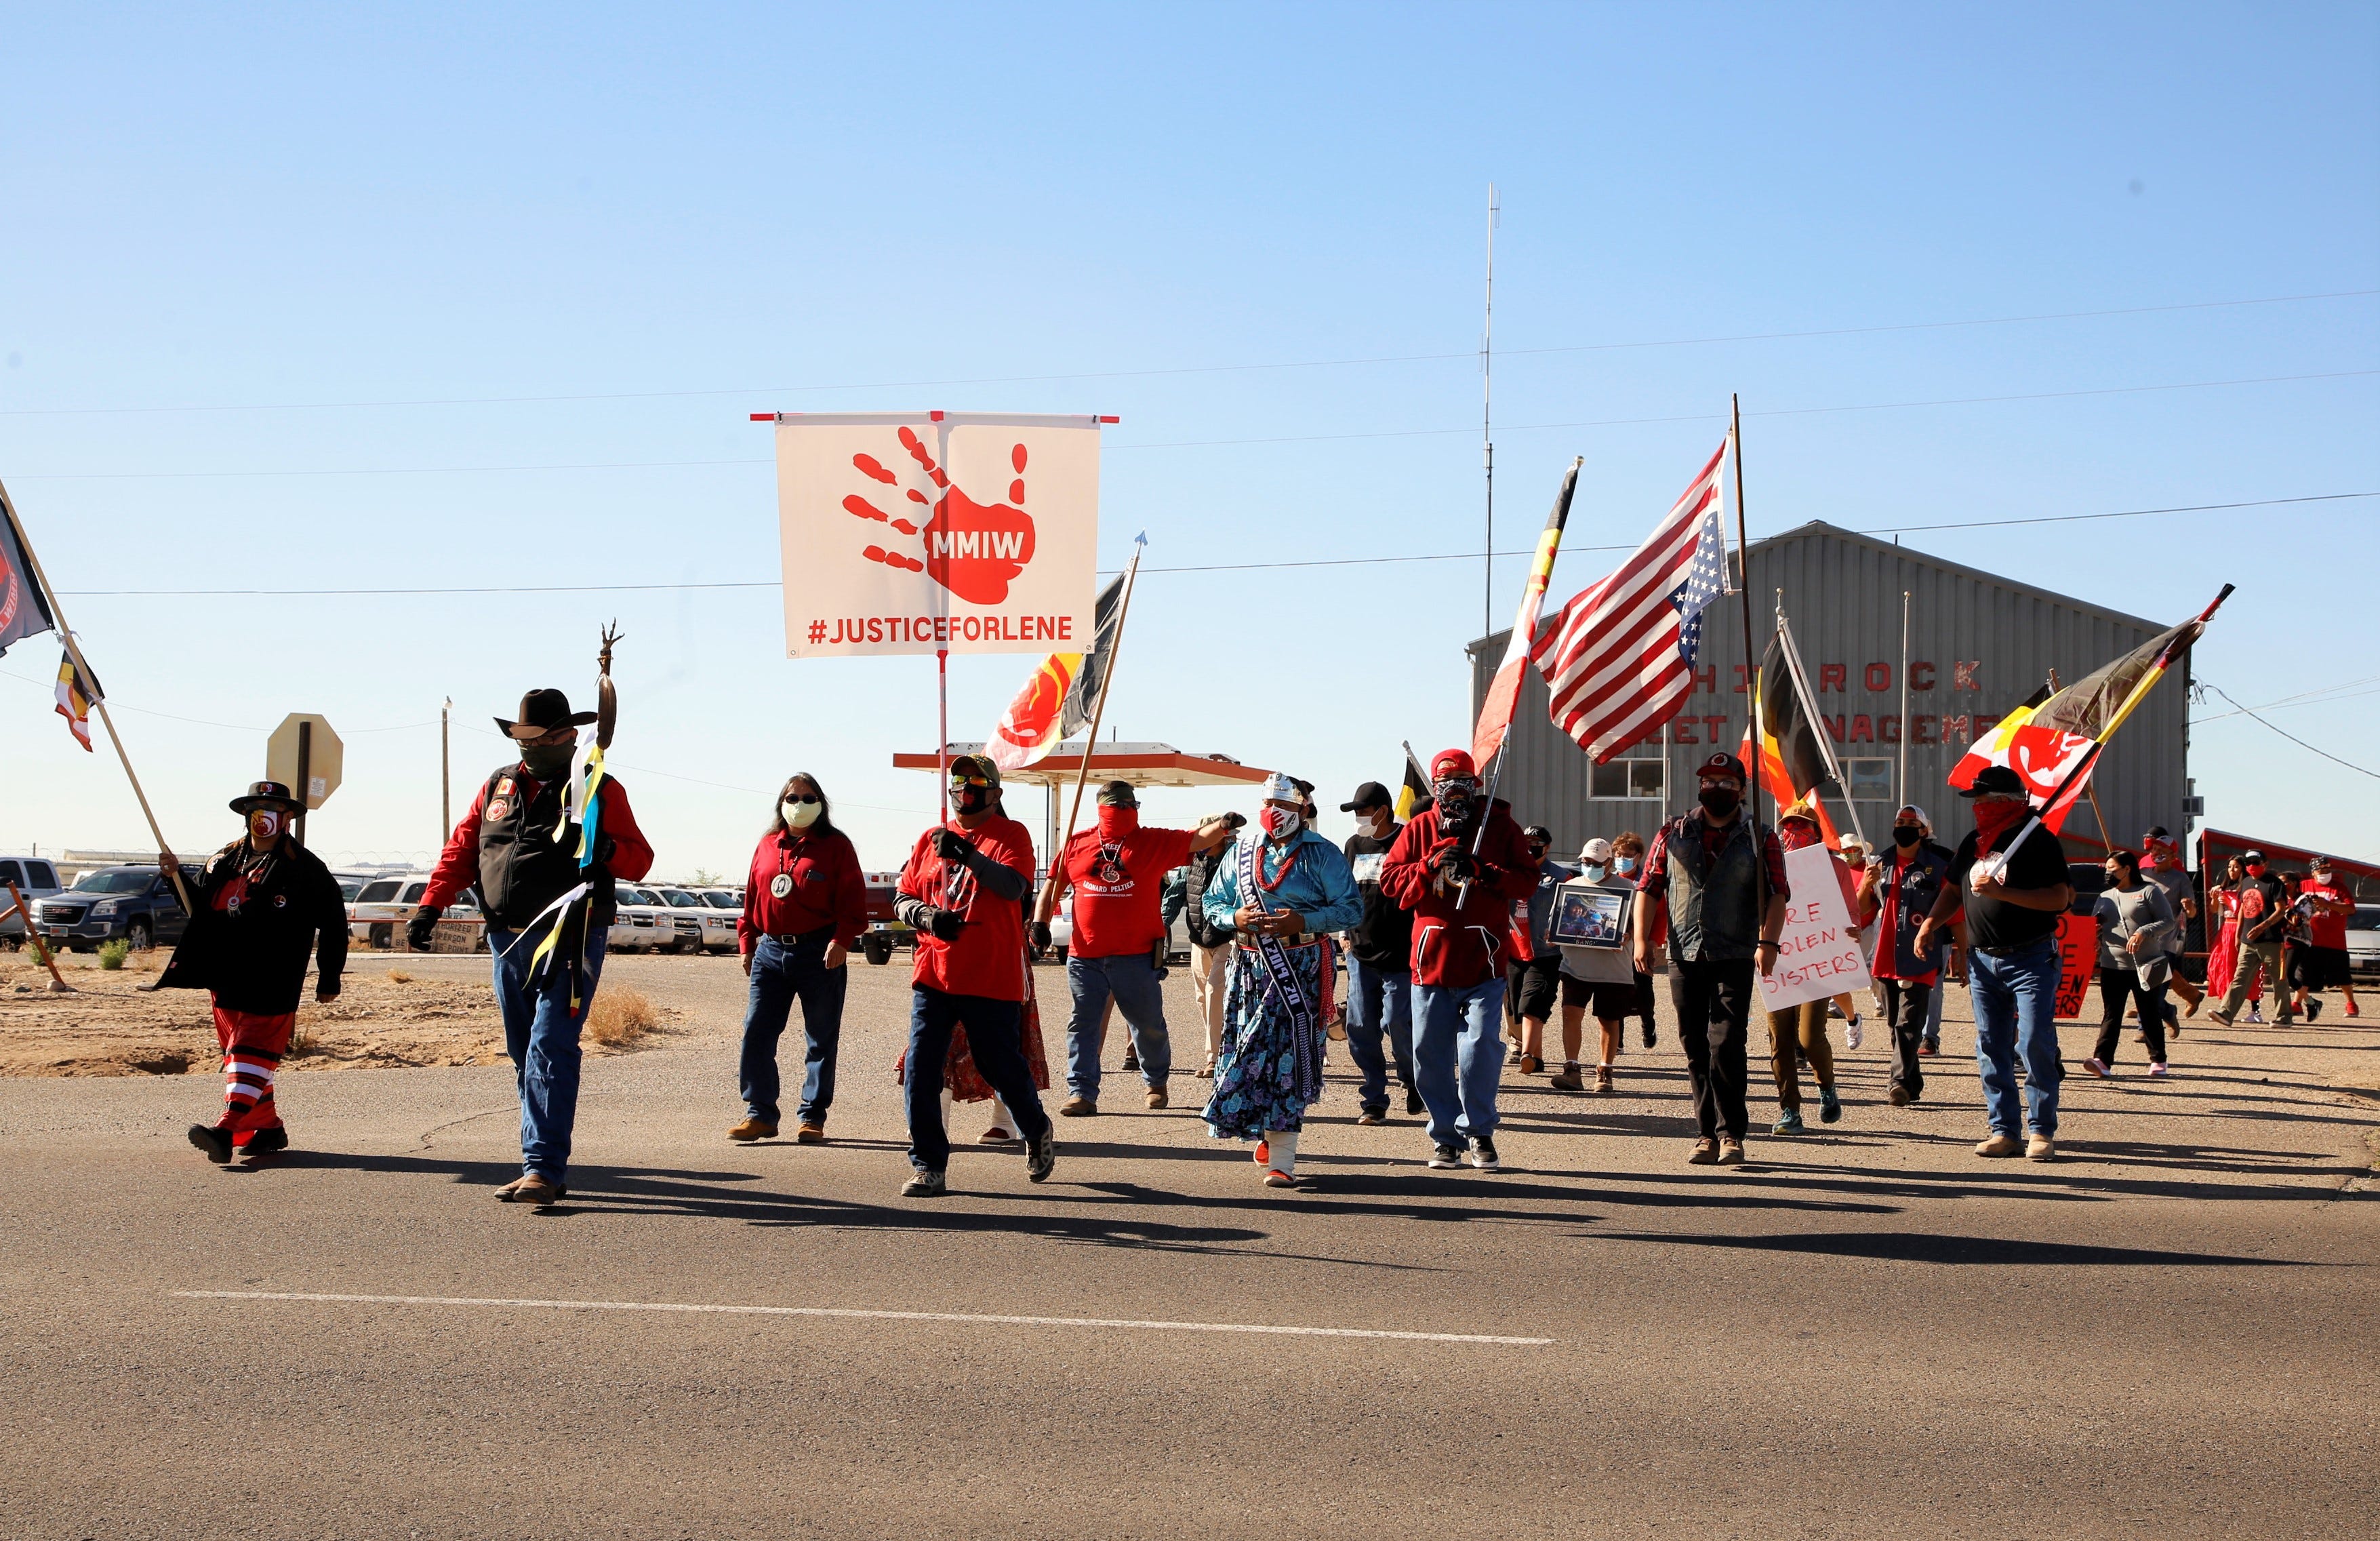 The memorial honor walk for Missing and Murdered Indigenous Women on May 5 started at the motor pool building in Shiprock.